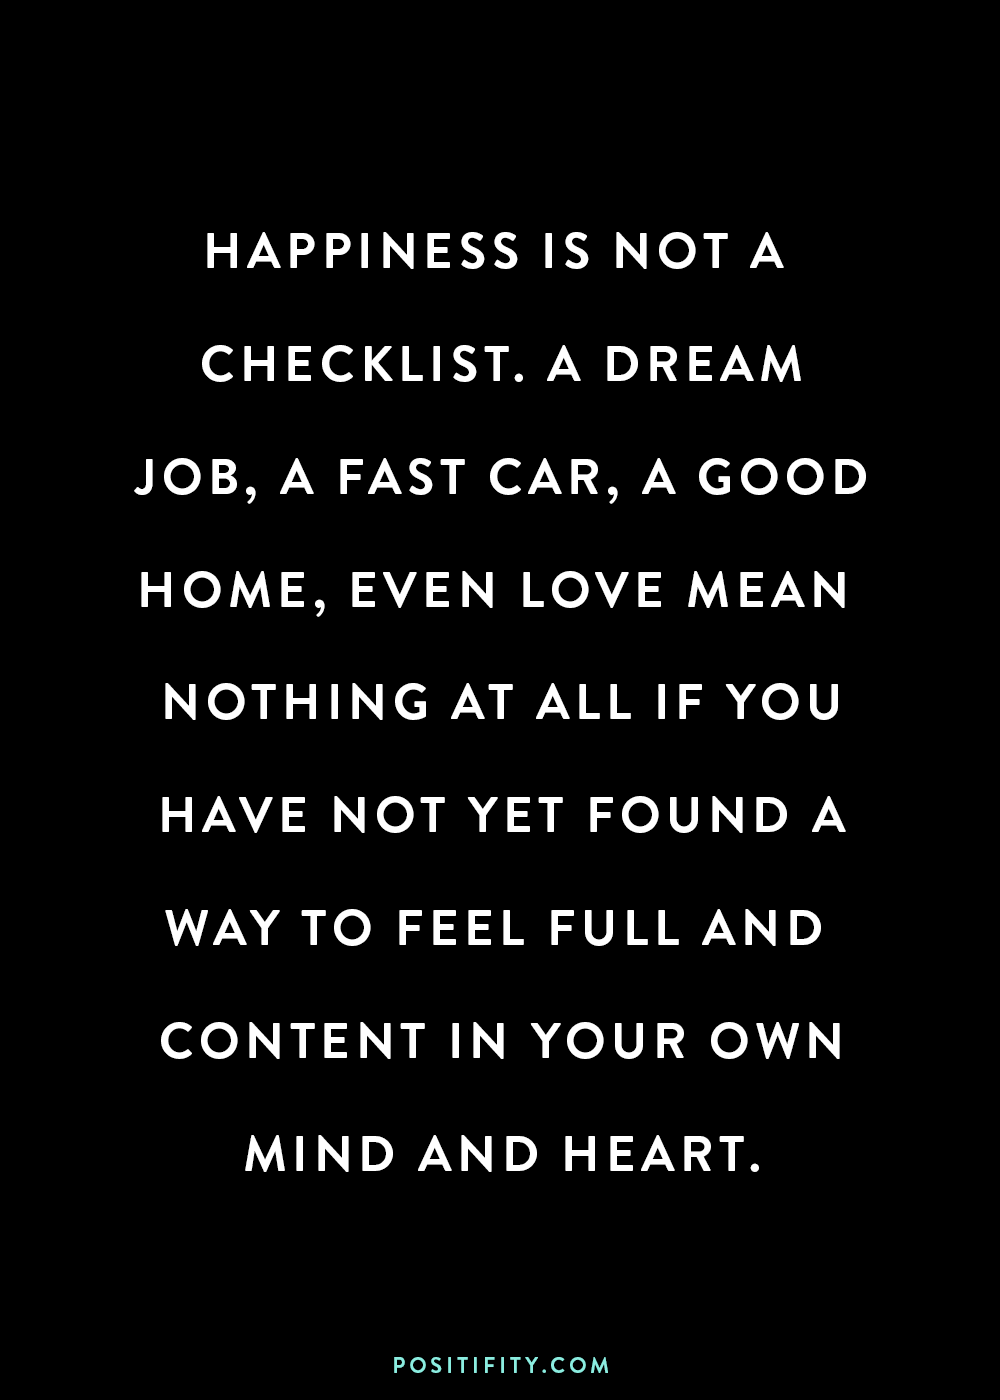 “Happiness is not a checklist. A dream job, a fast car, a good home, even love mean nothing at all if you have not yet found a way to feel full and content in your own mind and heart.”